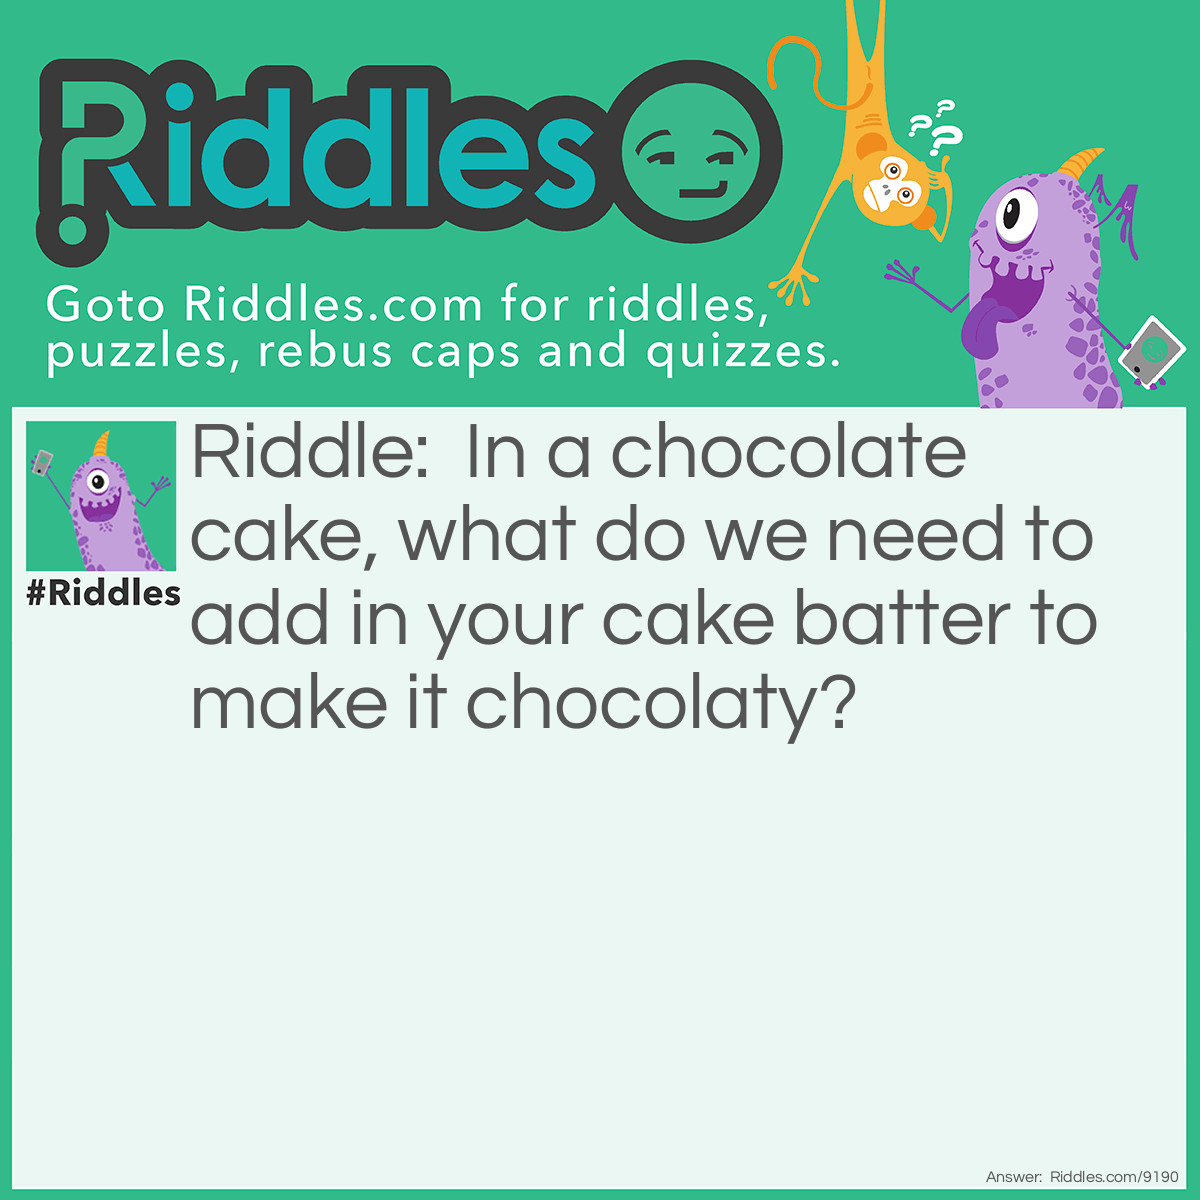 Riddle: In a chocolate cake, what do we need to add in your cake batter to make it chocolaty? Answer: Cocoa. Maida.